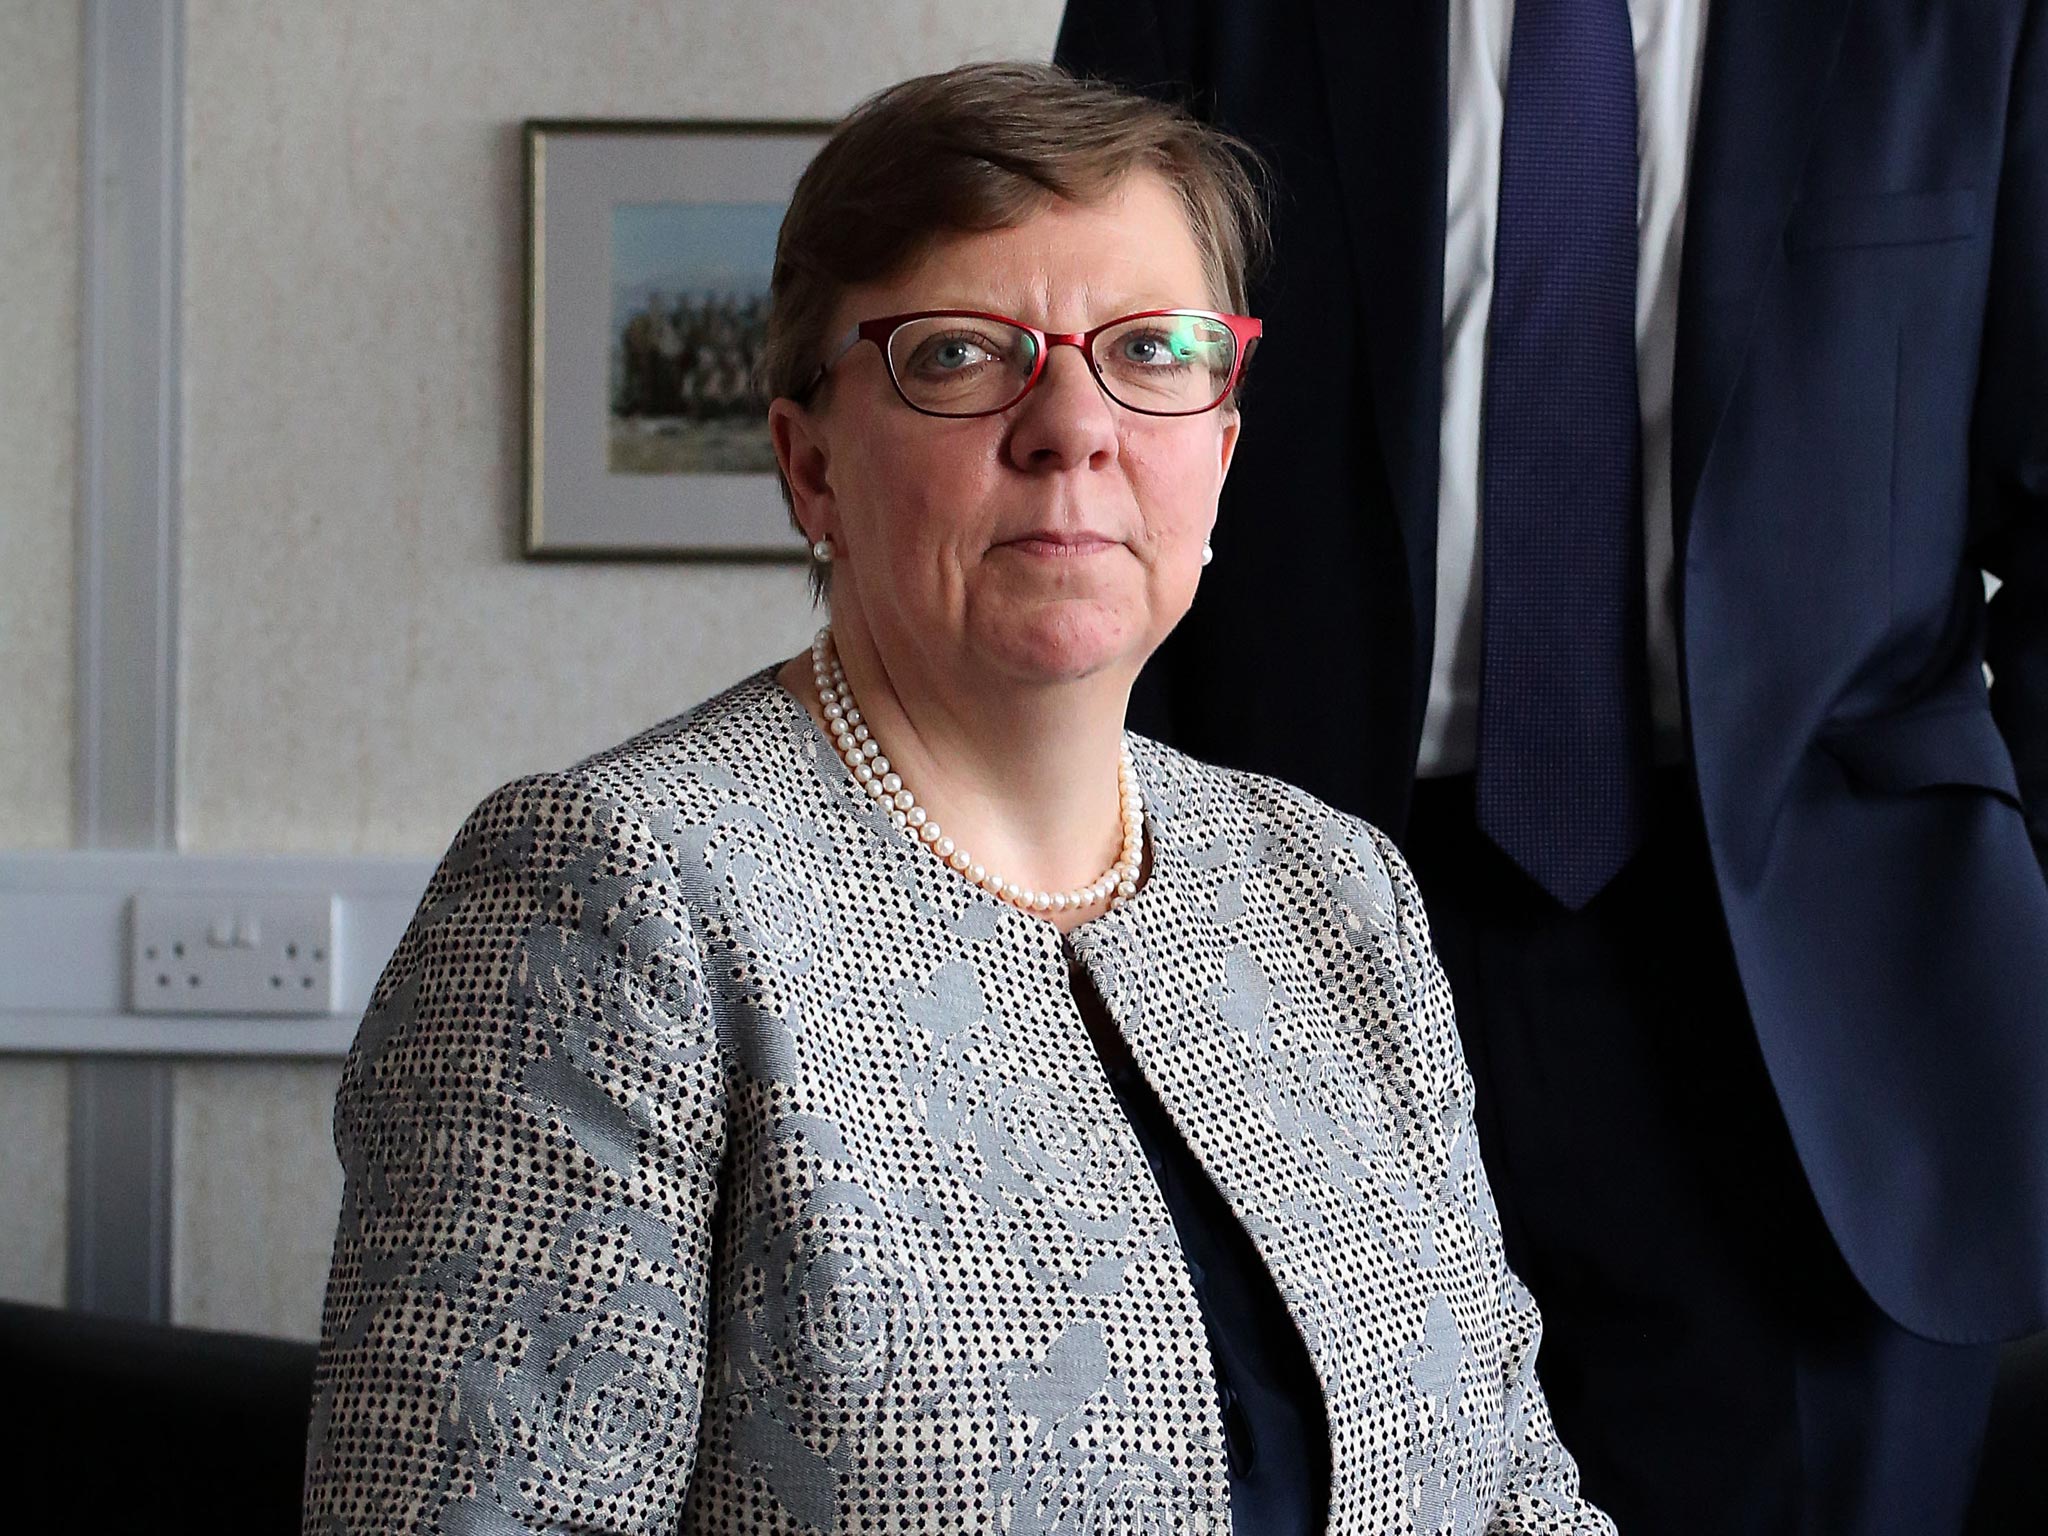 Alison Saunders said police who dropped rape cases would in future face a far higher degree of scrutiny